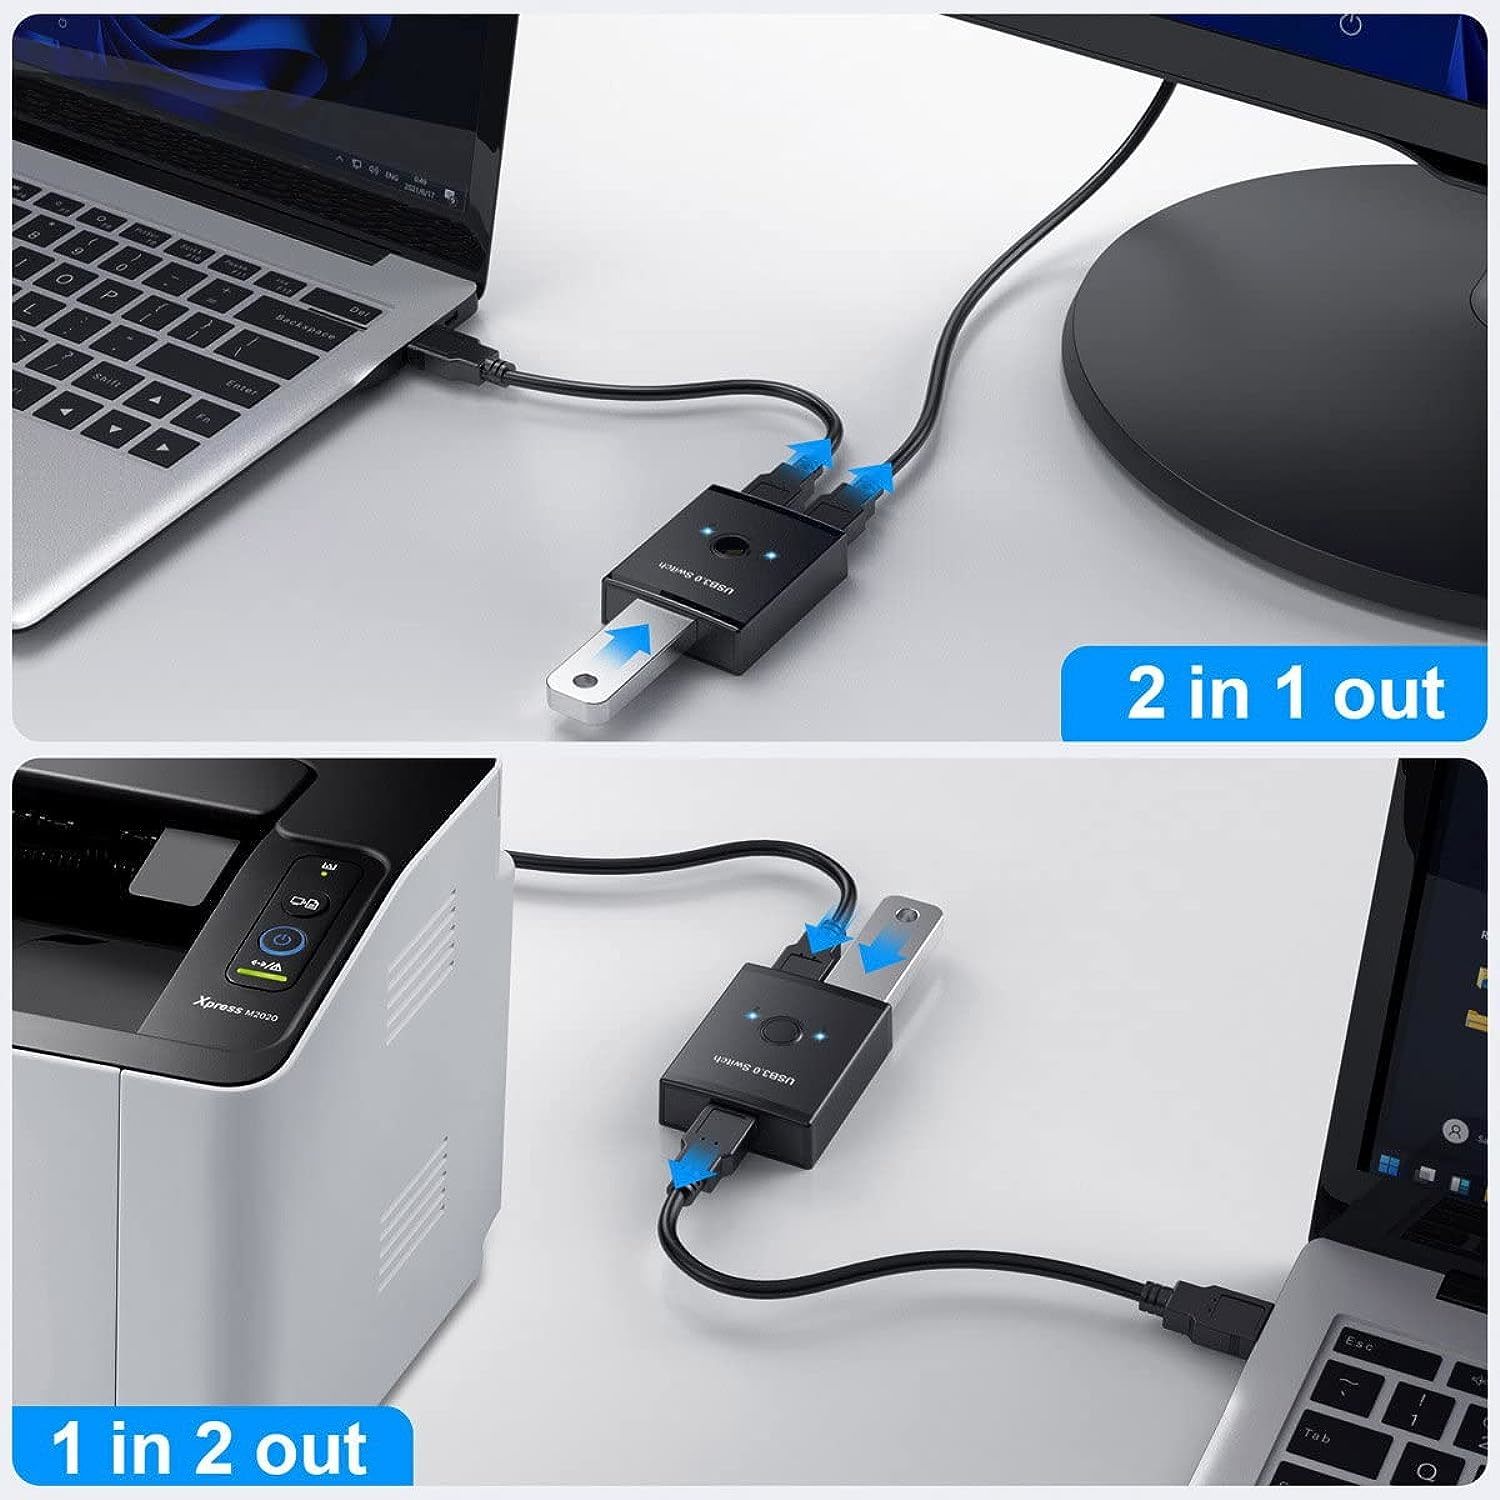  USB 3.0 Switch,Bi-Directional USB 3.0 Switch Selector, 2 in 1  Out / 1 in 2 Out USB Switcher for 2 PCs Share 1 USB Device or 1 PC Share 2  USB